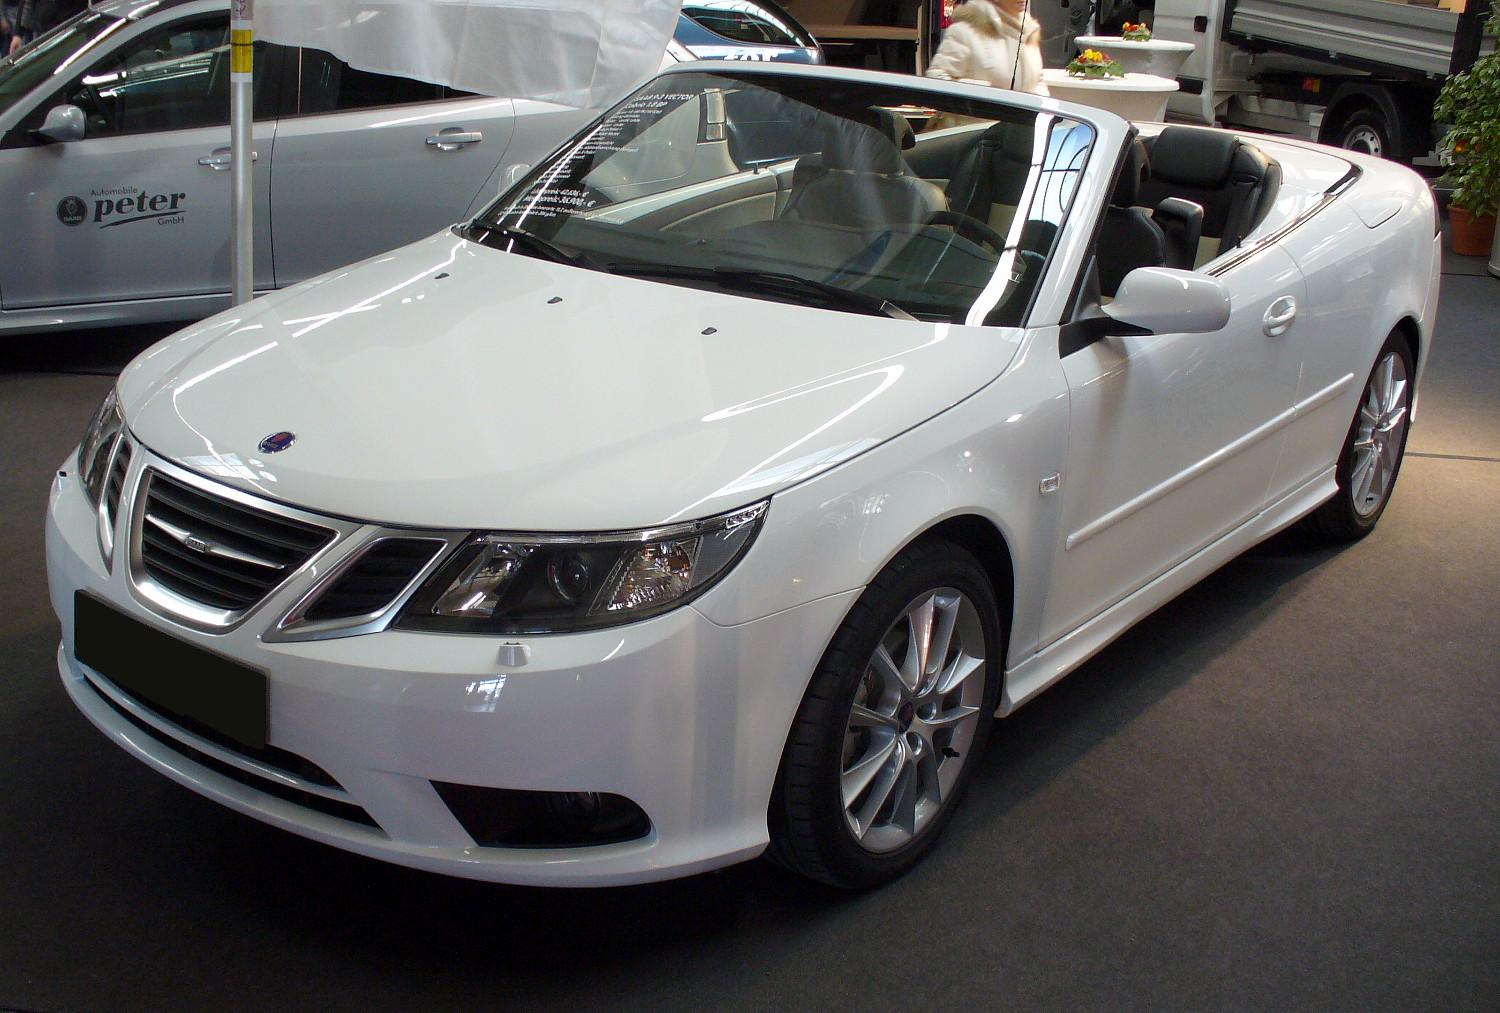 Fichier: Saab 9-3 Cabriolet Vector 1.8t BioPower.JPG - Wikimedia Commons